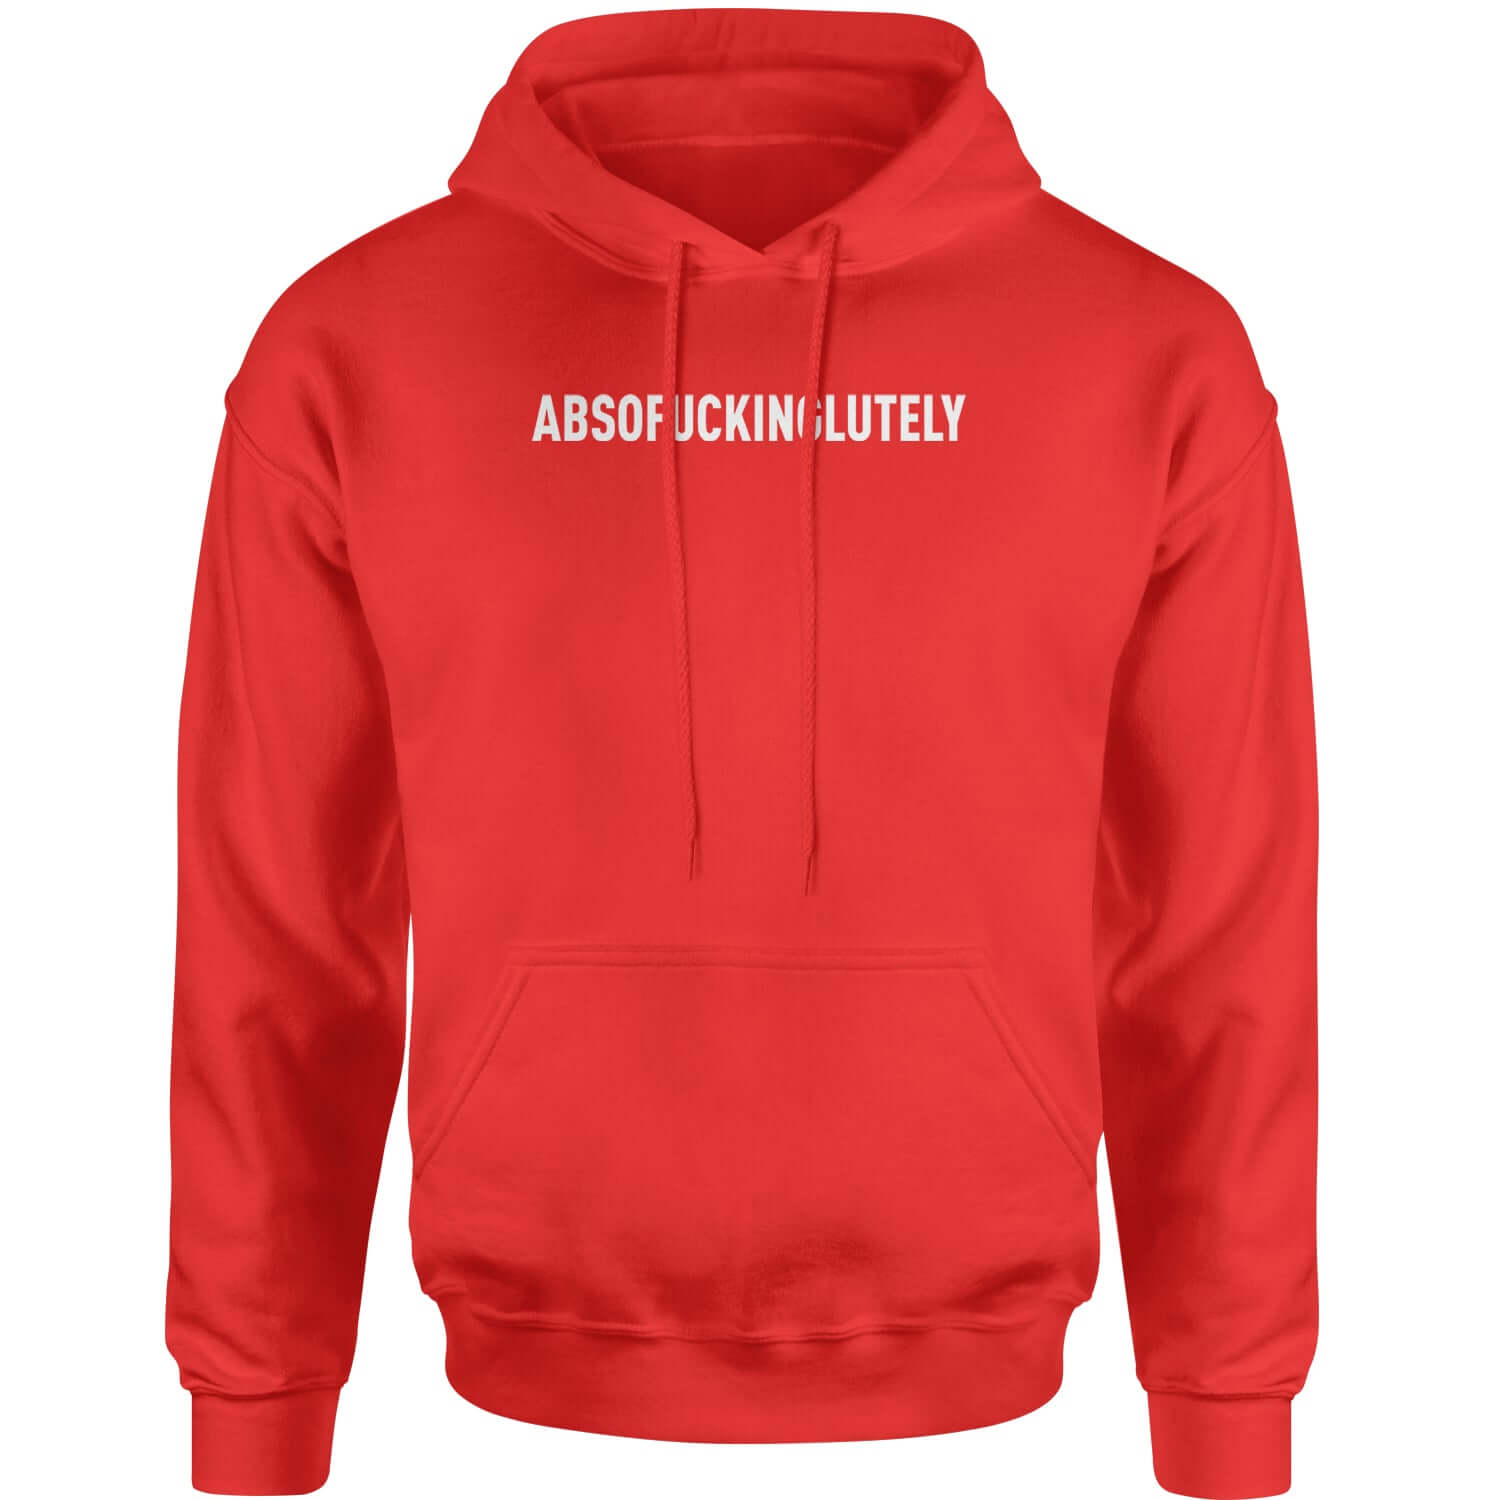 Abso f-cking lutely Adult Hoodie Sweatshirt funny, shirt by Expression Tees